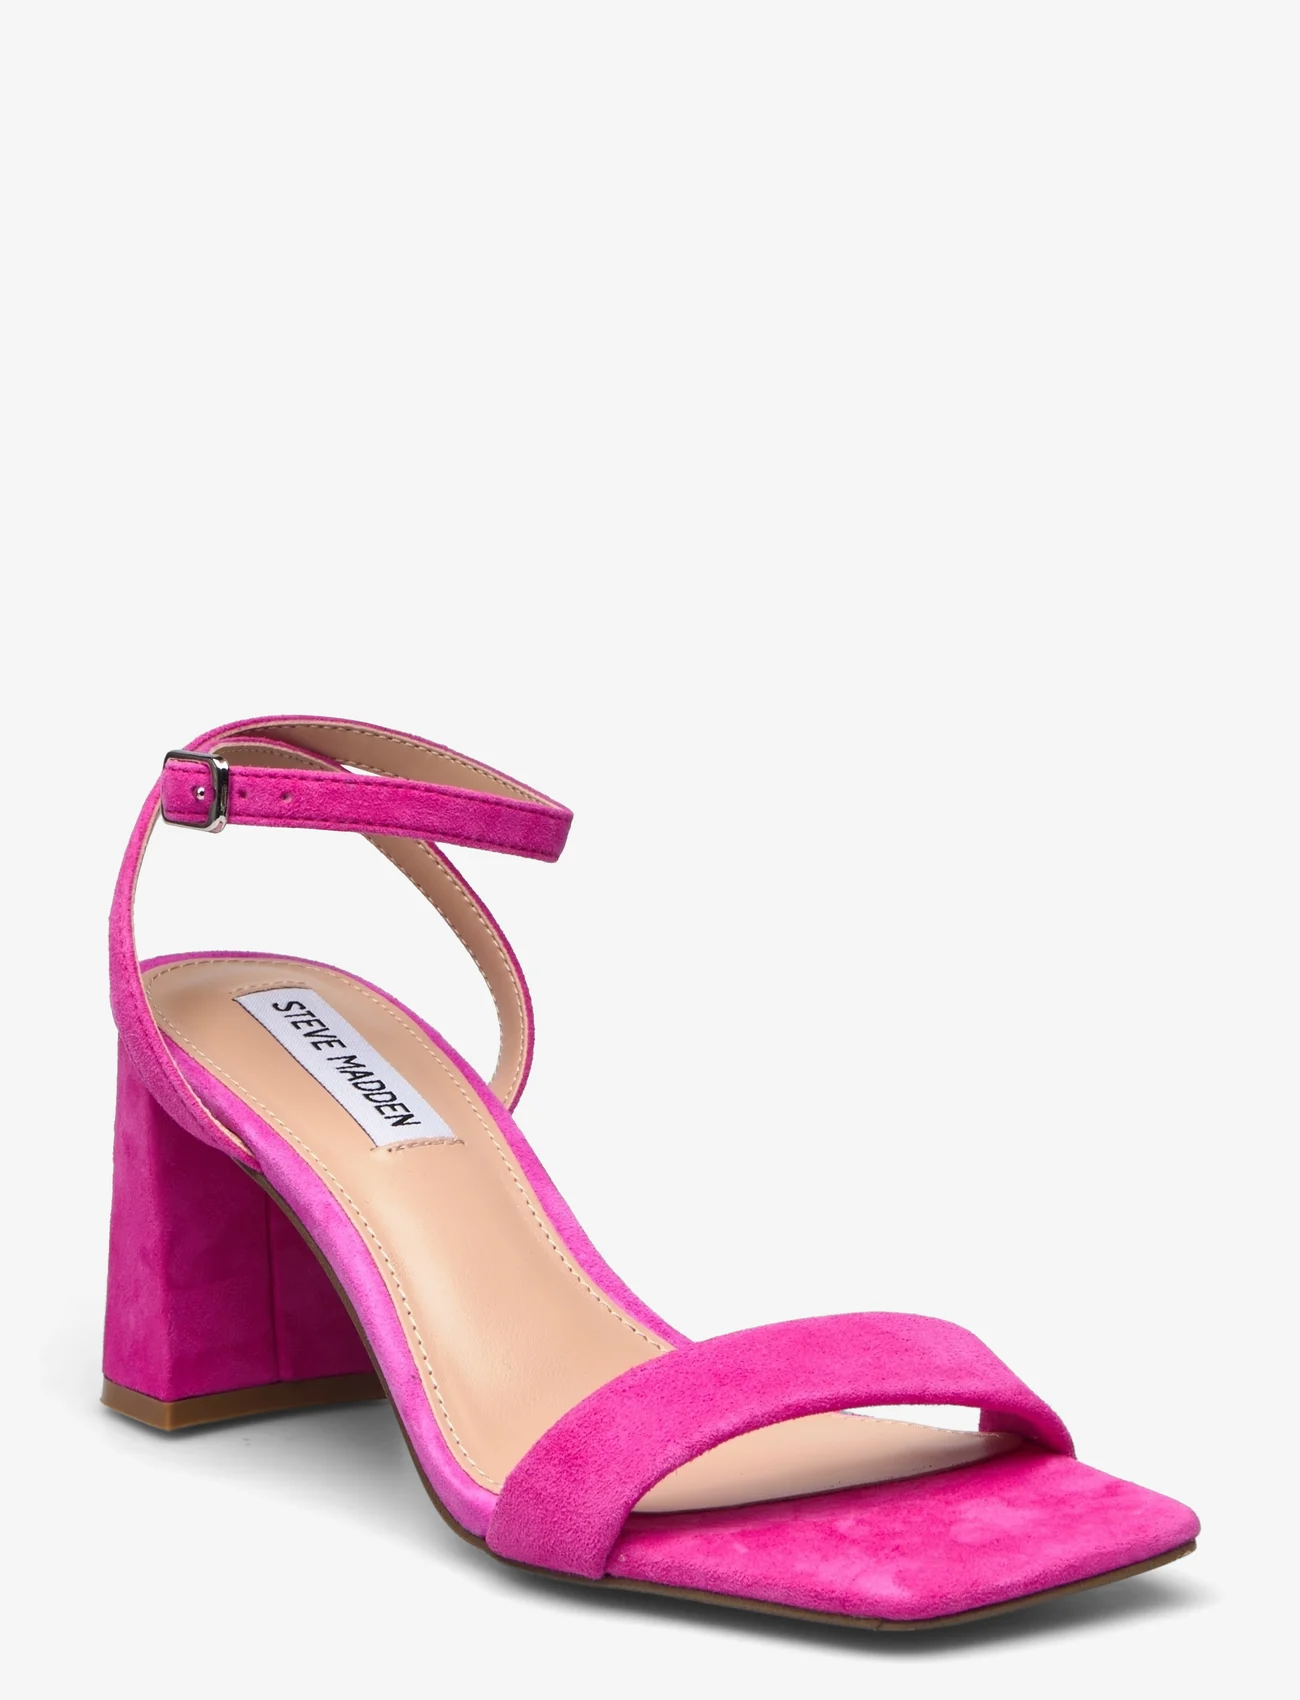 Steve Madden - Luxe Sandal - party wear at outlet prices - magenta suede - 0